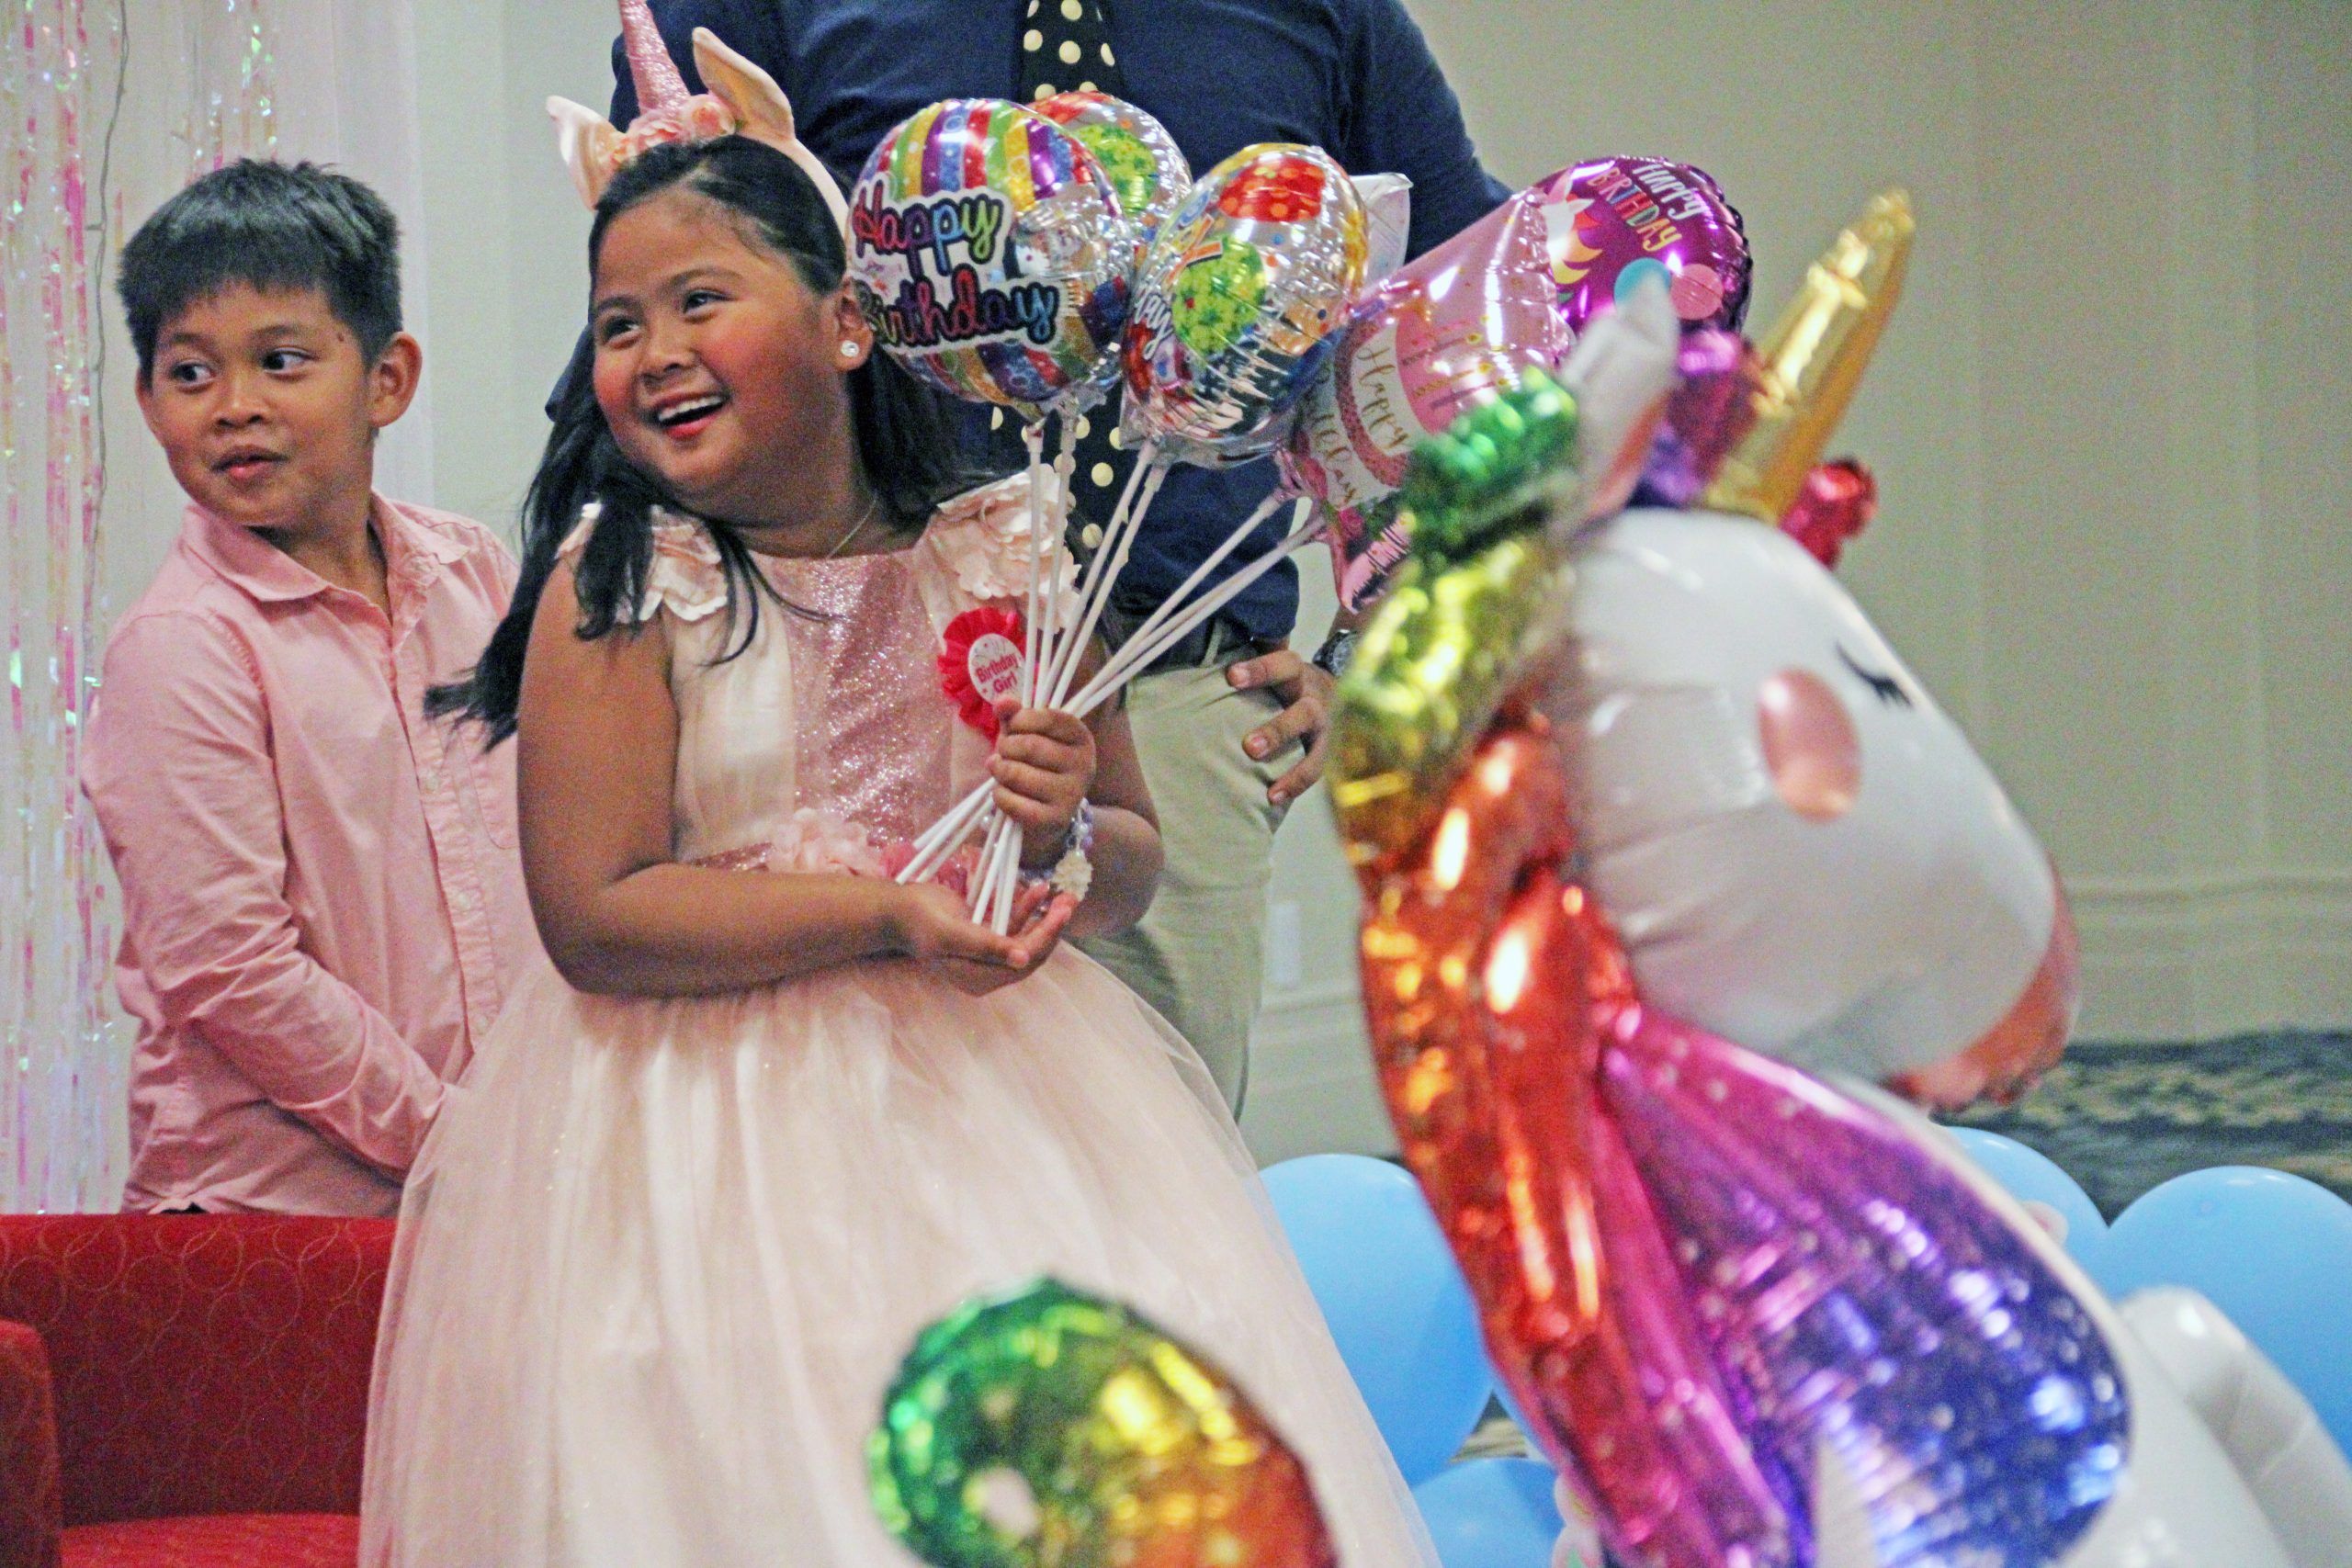 Filipino birthday for seven-year old sees traditions on display